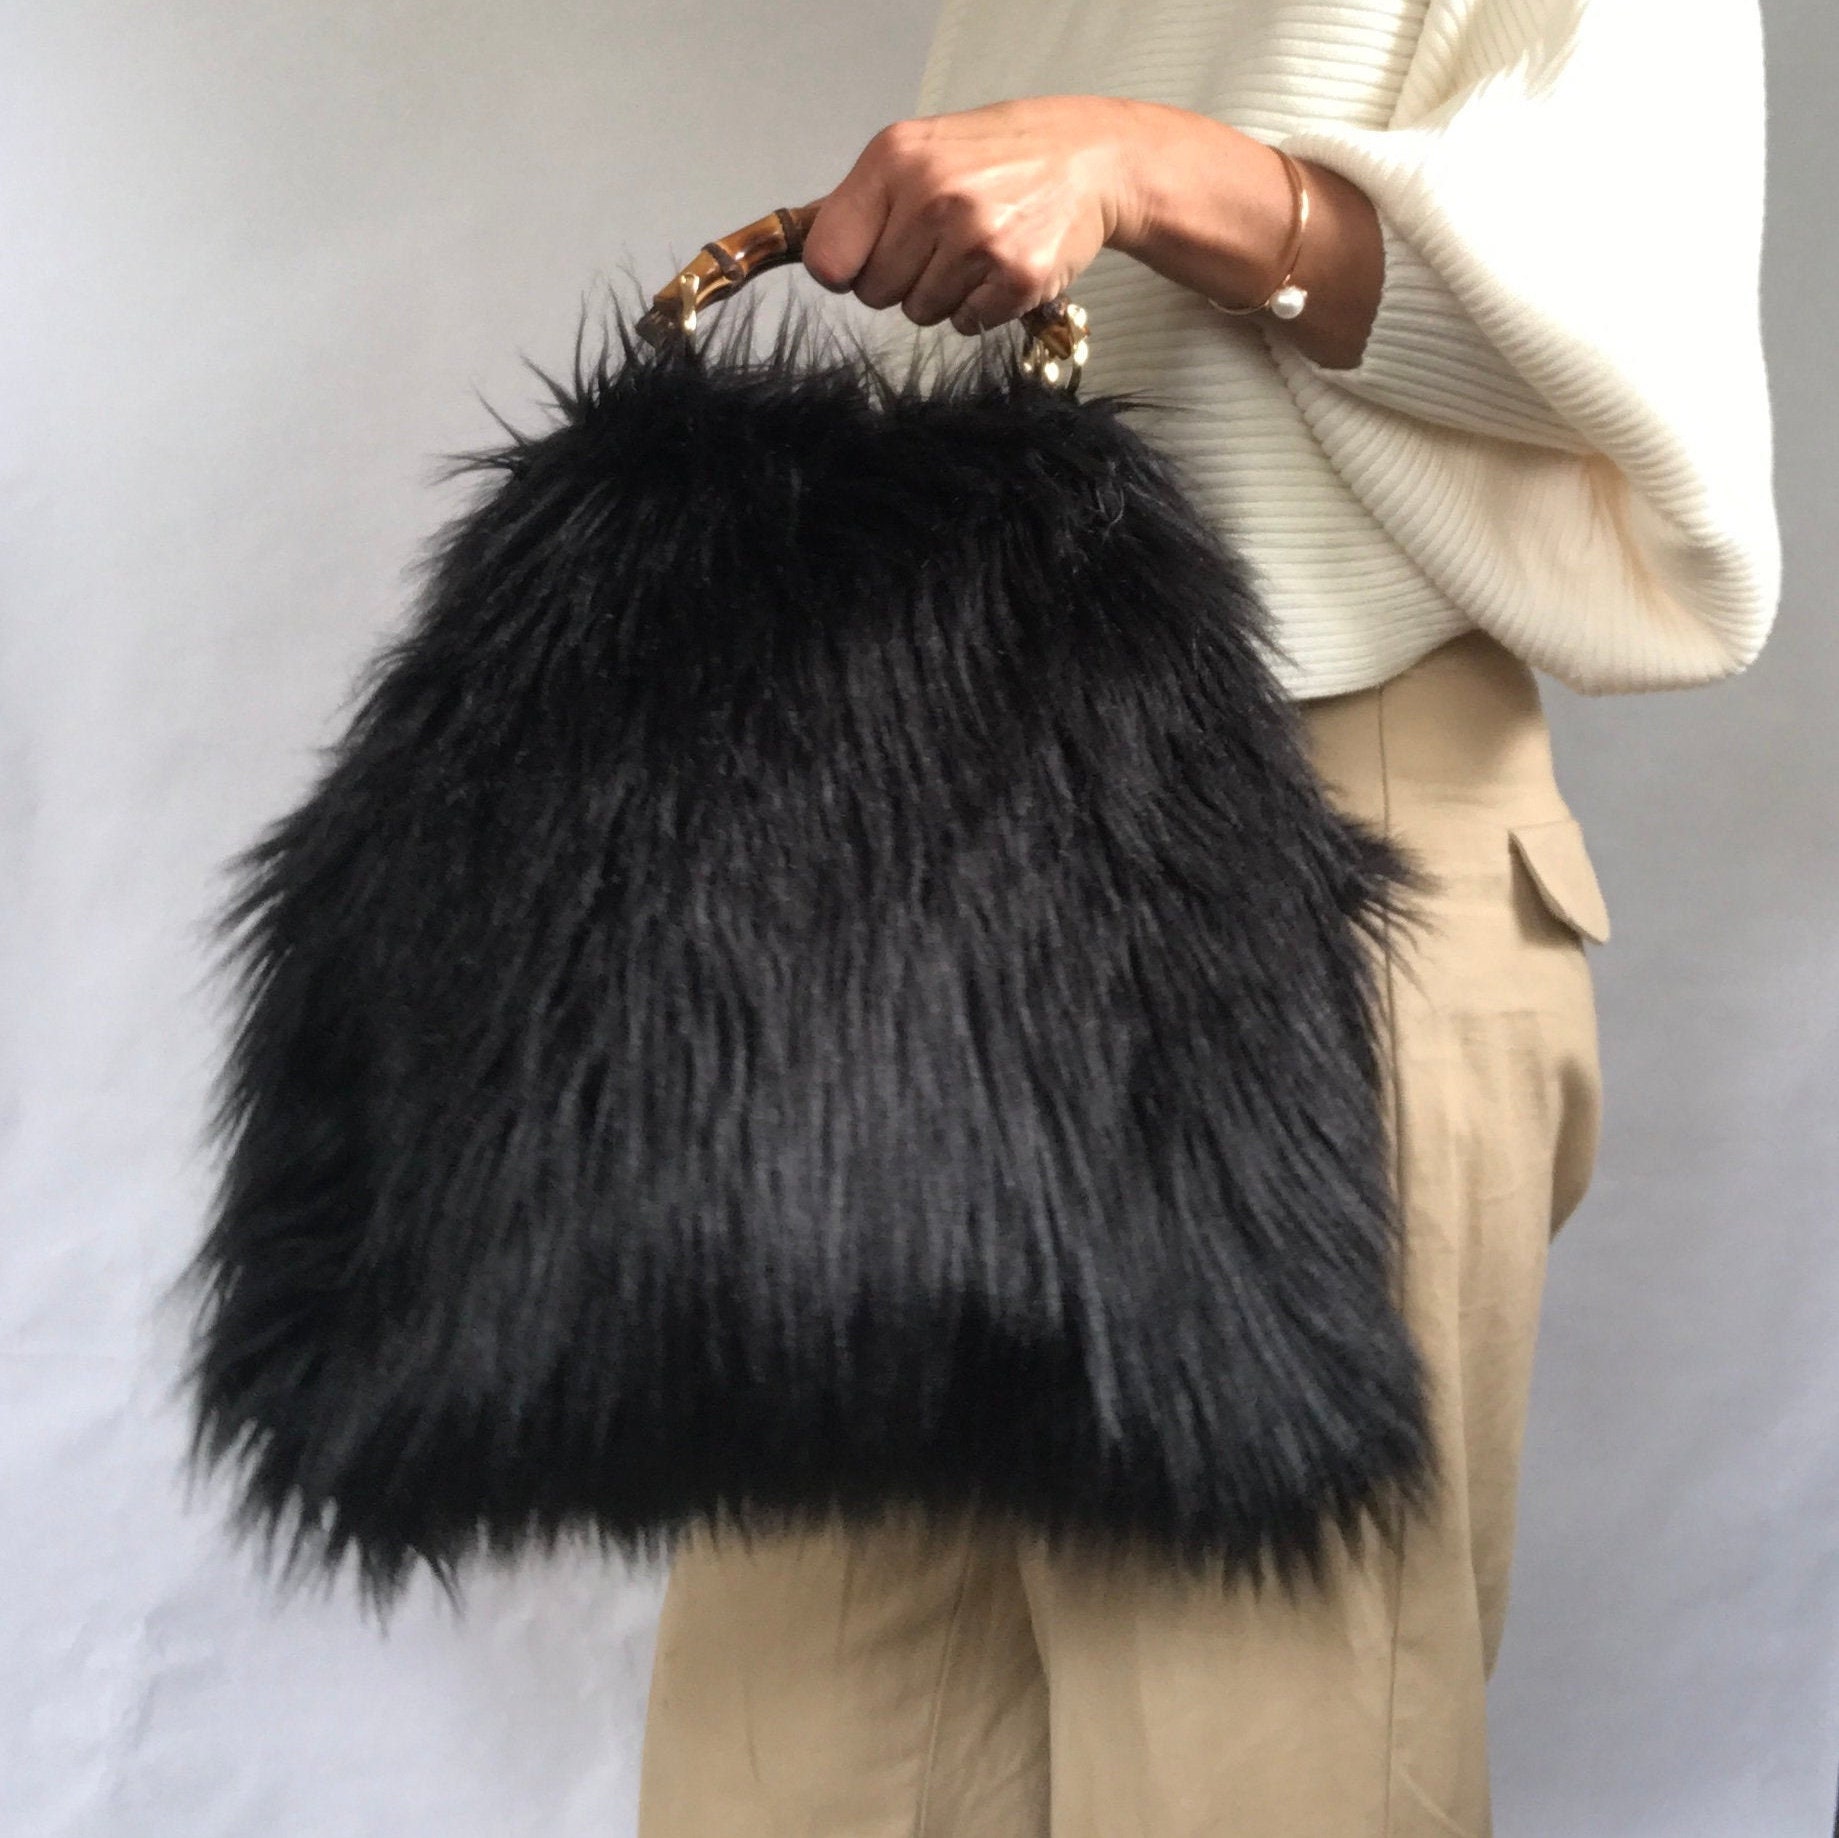 LARGE-SIZE FAUX FUR BAG WITH FLAP AND LOGO